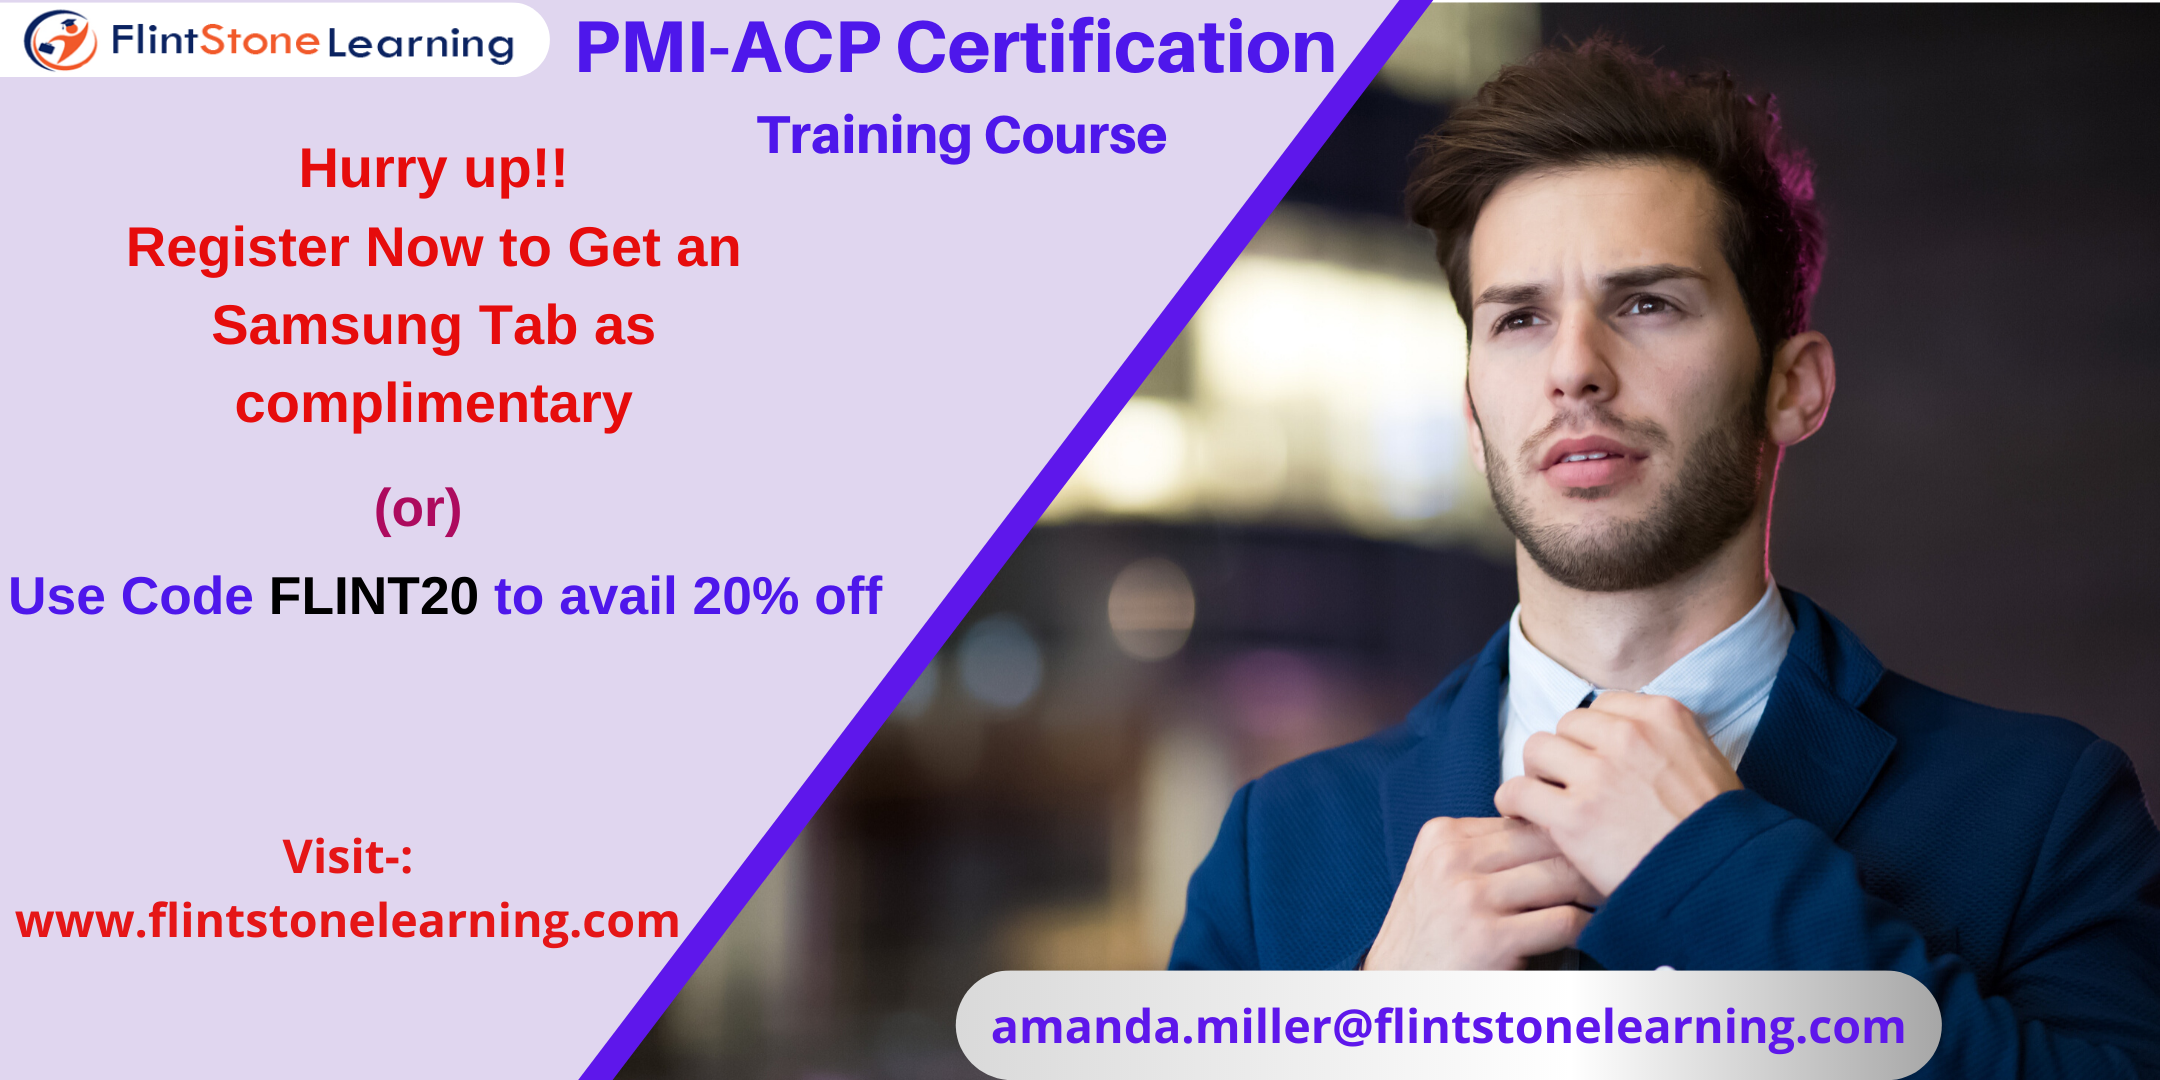 PMI-ACP Certification Training Course in Coppell, TX